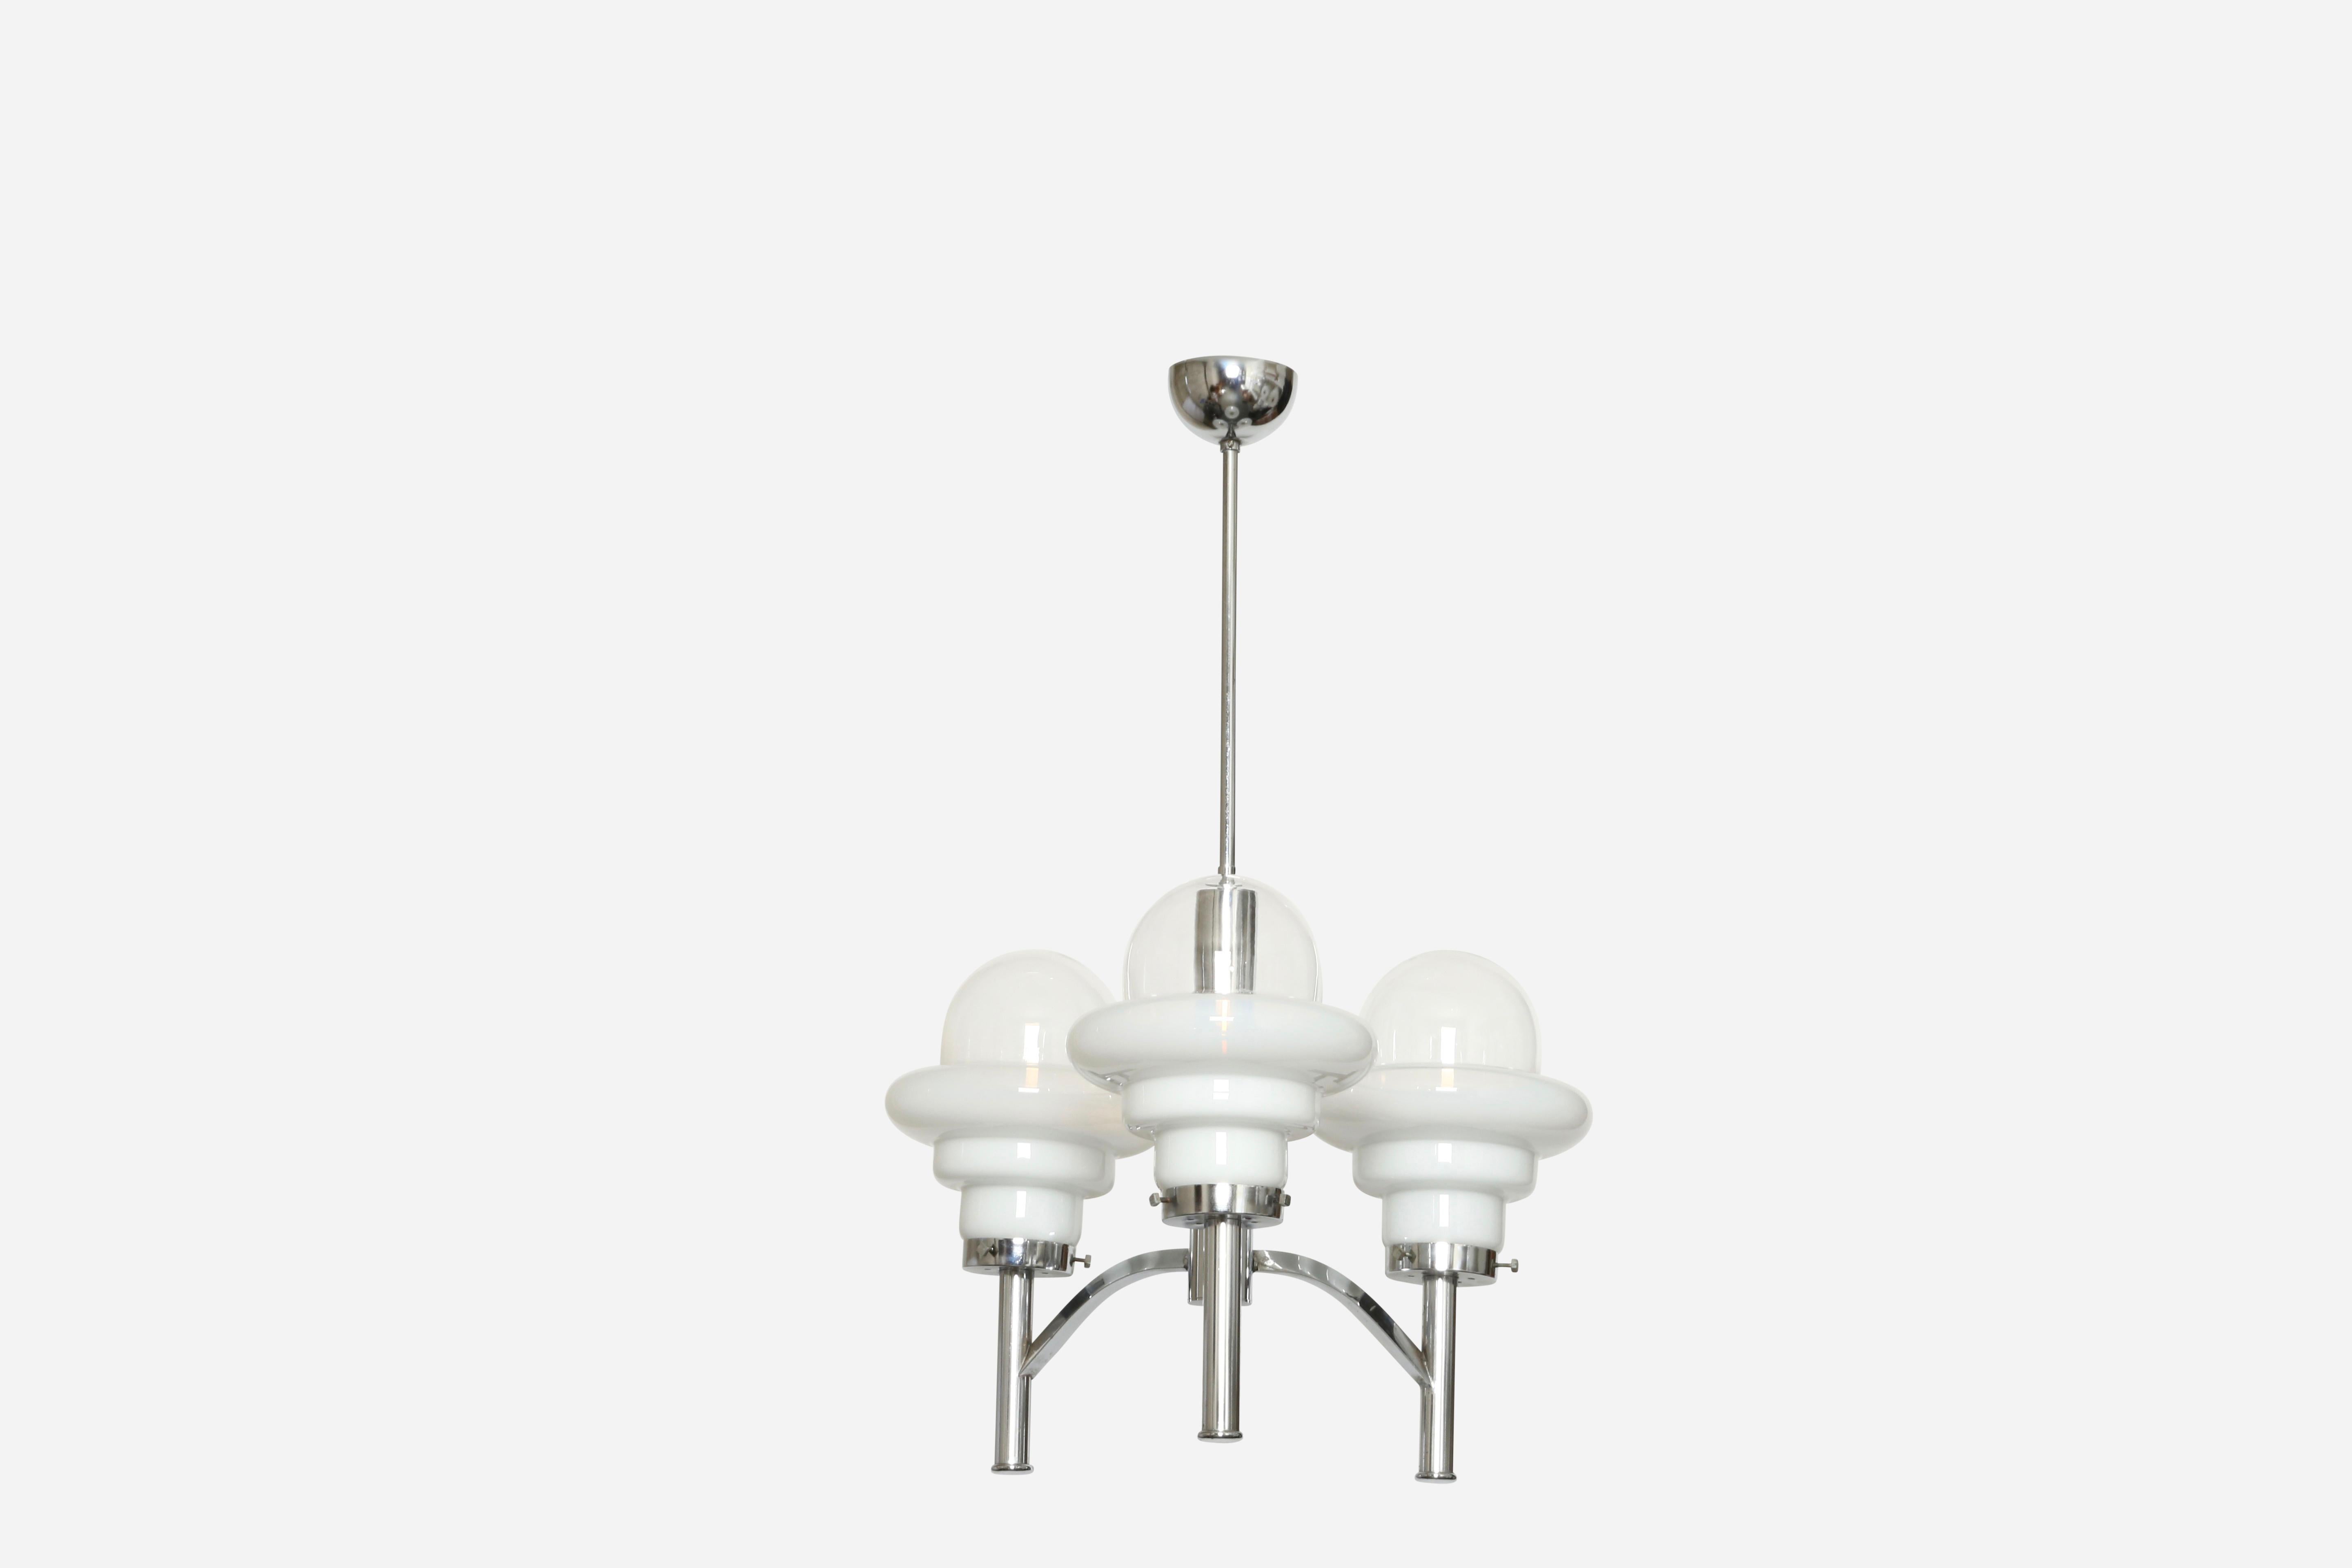 Carlo Nason style chandelier.
Designed and made in Italy, 1960s.
Murano glass, chrome plated metal.
Complimentary US rewiring upon request.

We take pride in bringing vintage fixtures to their full glory again.
At Illustris Lighting our main focus